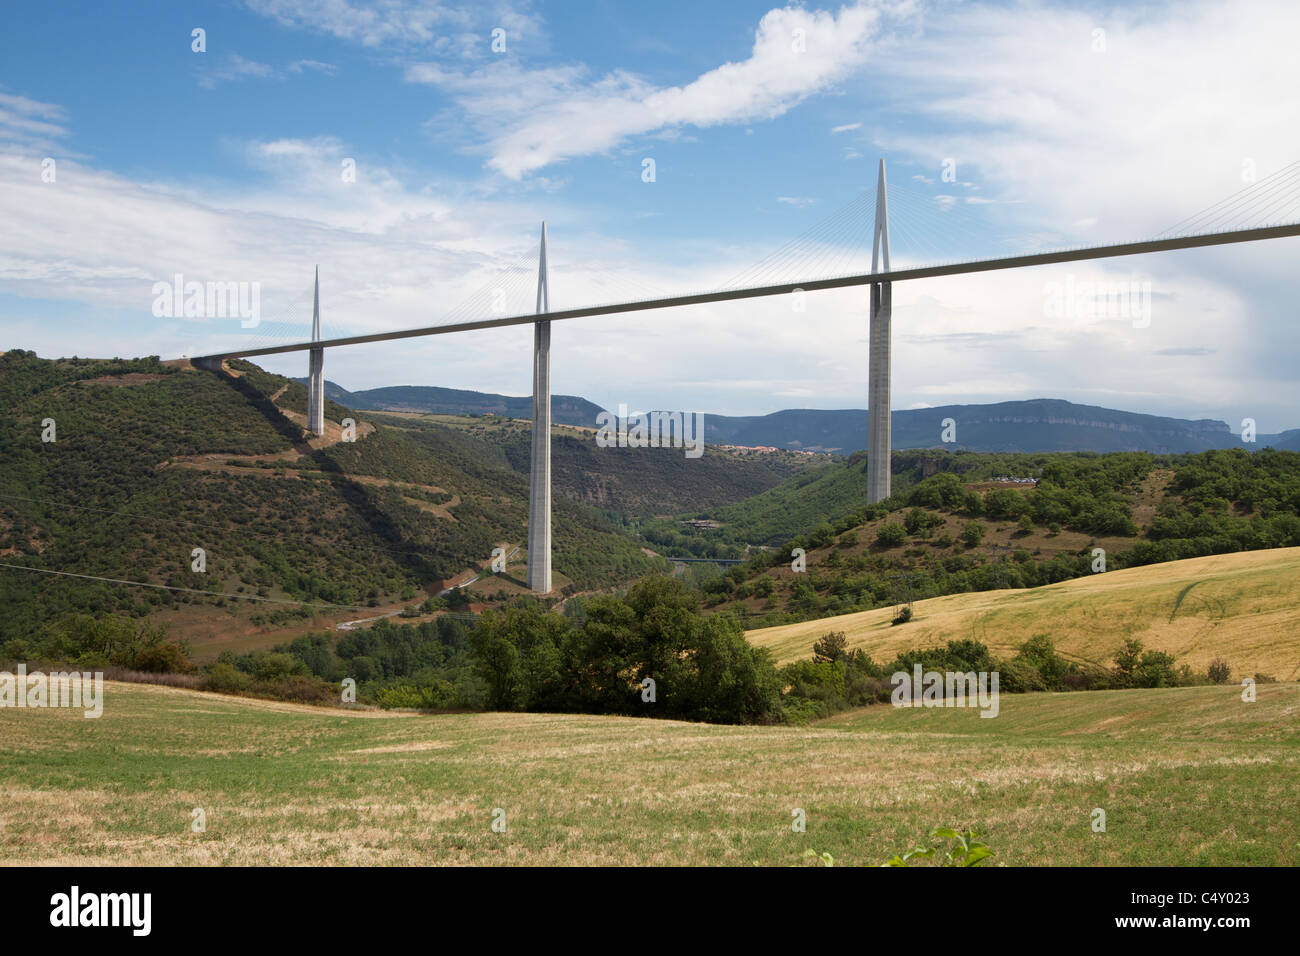 Millau viaduct highest bridge in the world spanning the Tarn Gorge in southern France Stock Photo